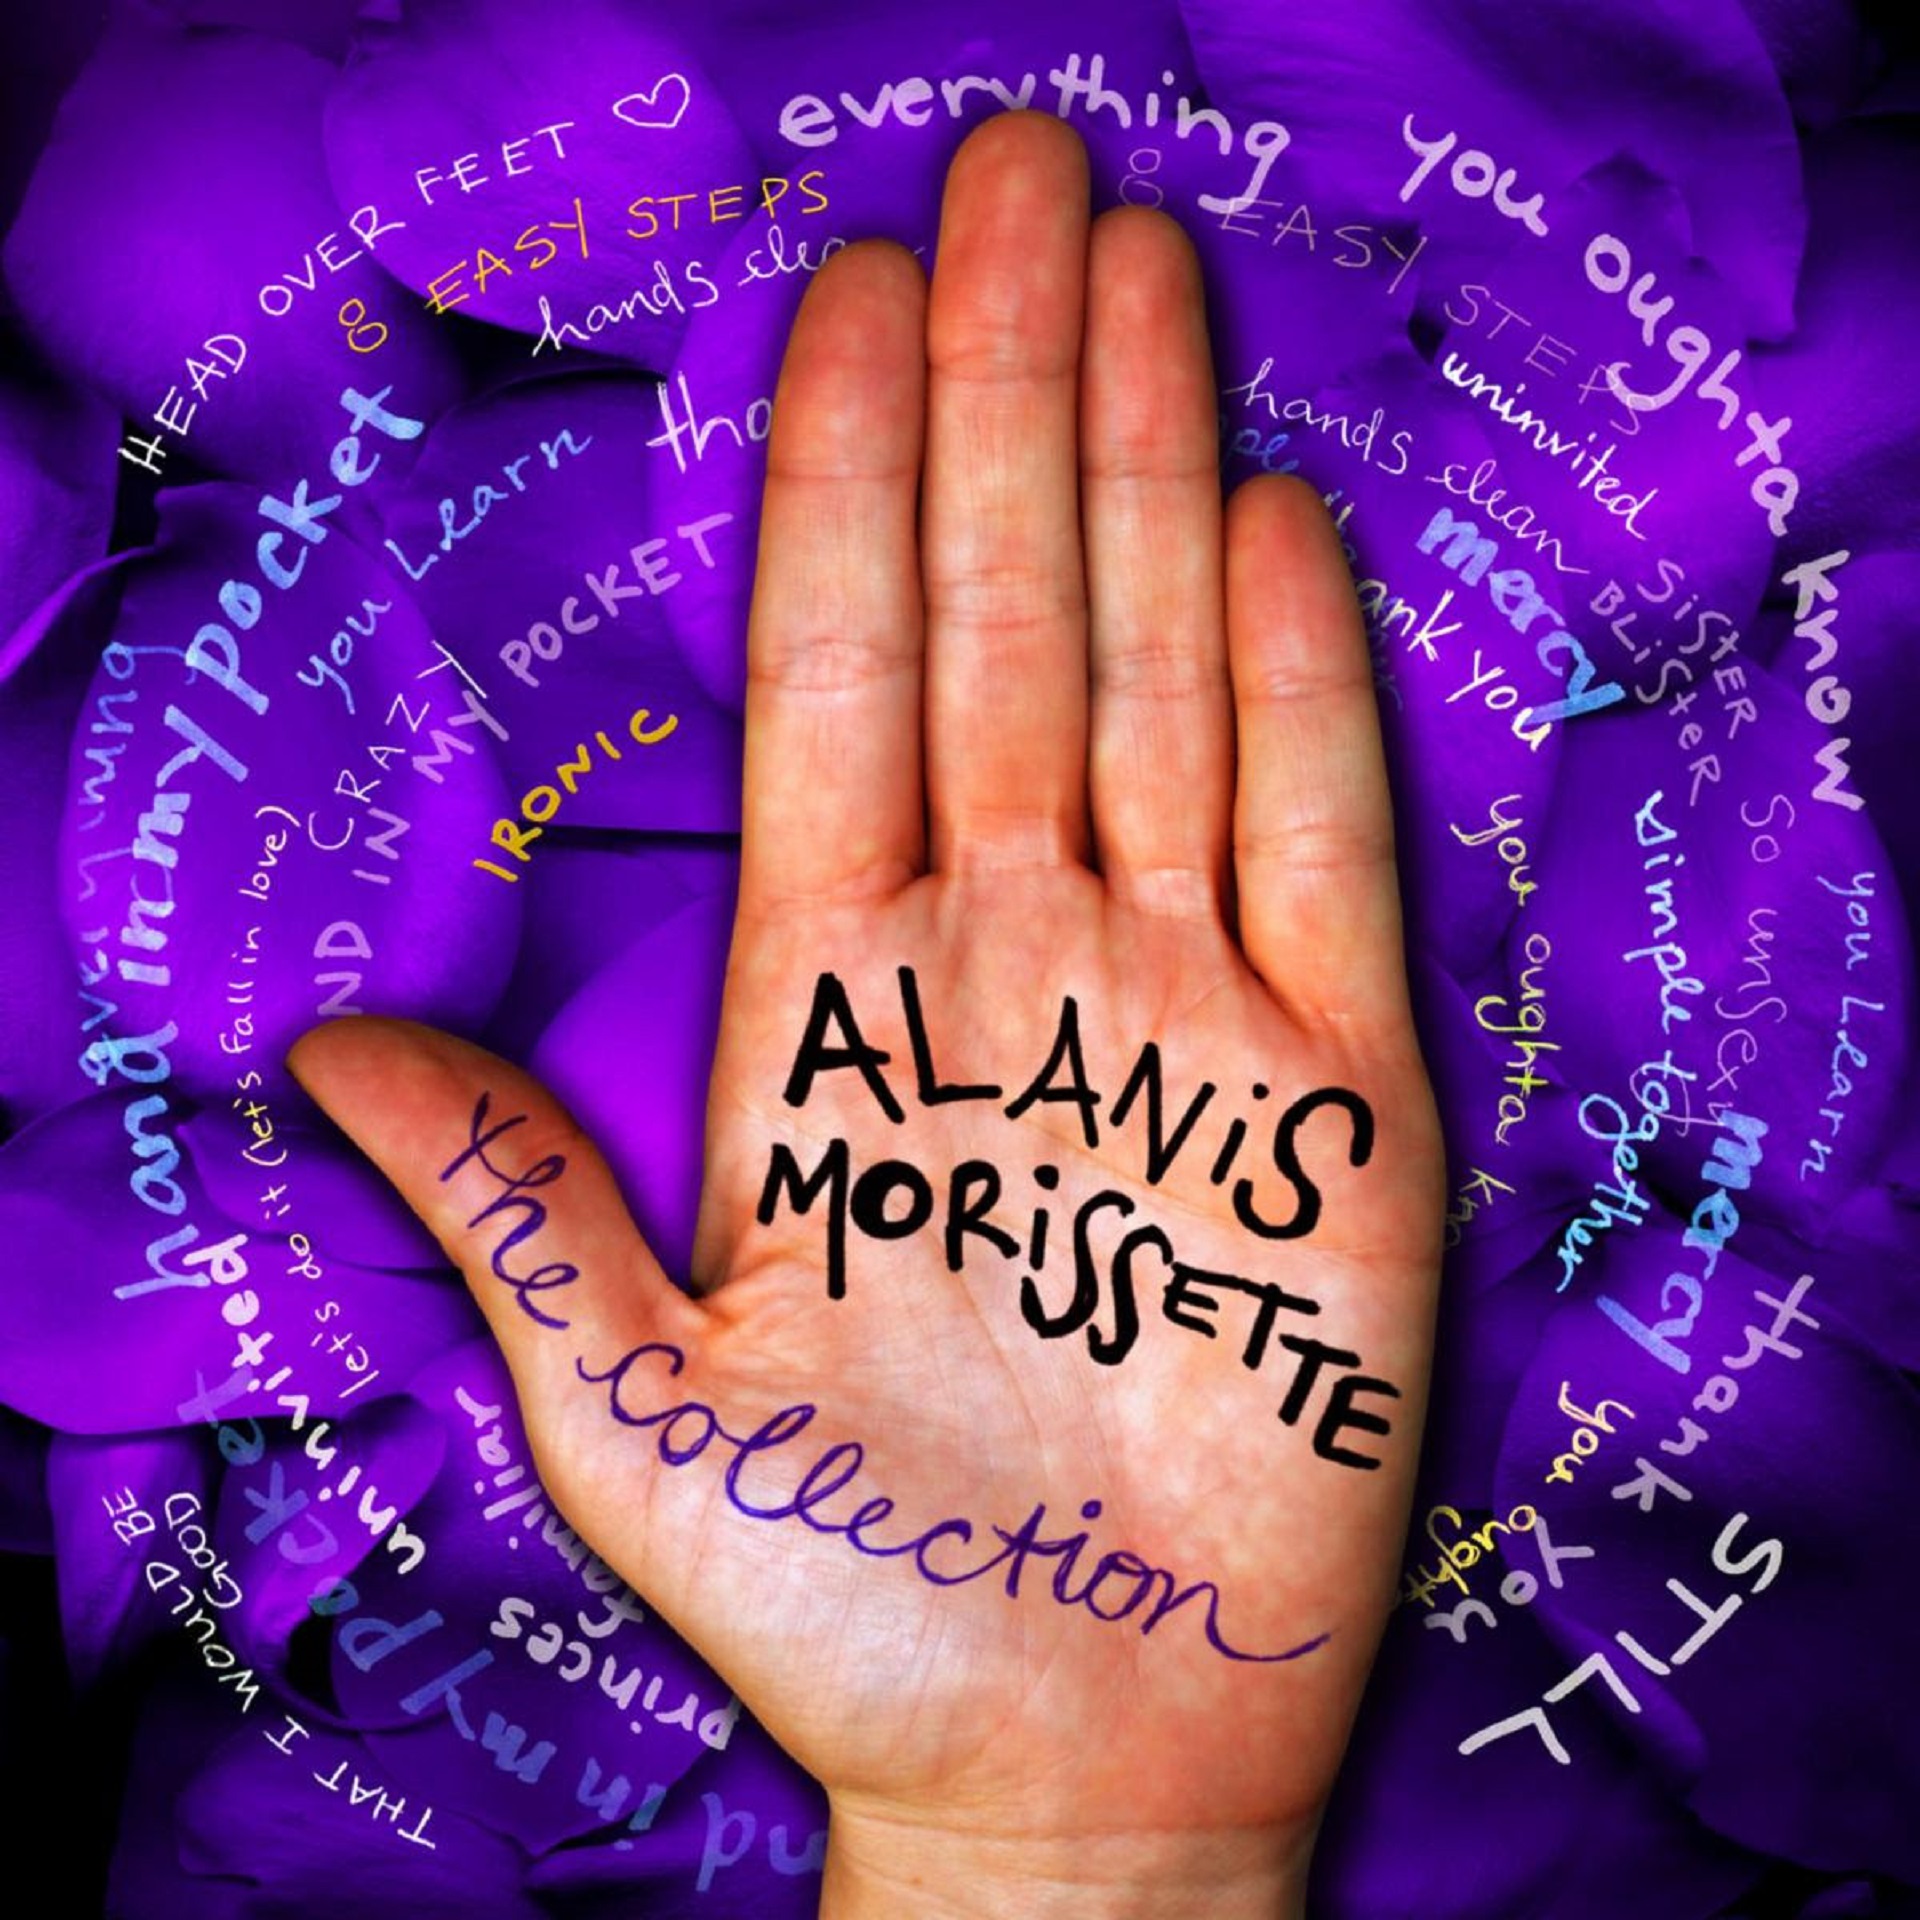 Rhino announces vinyl debut of Alanis Morissette's 'THE COLLECTION' (out August 25)